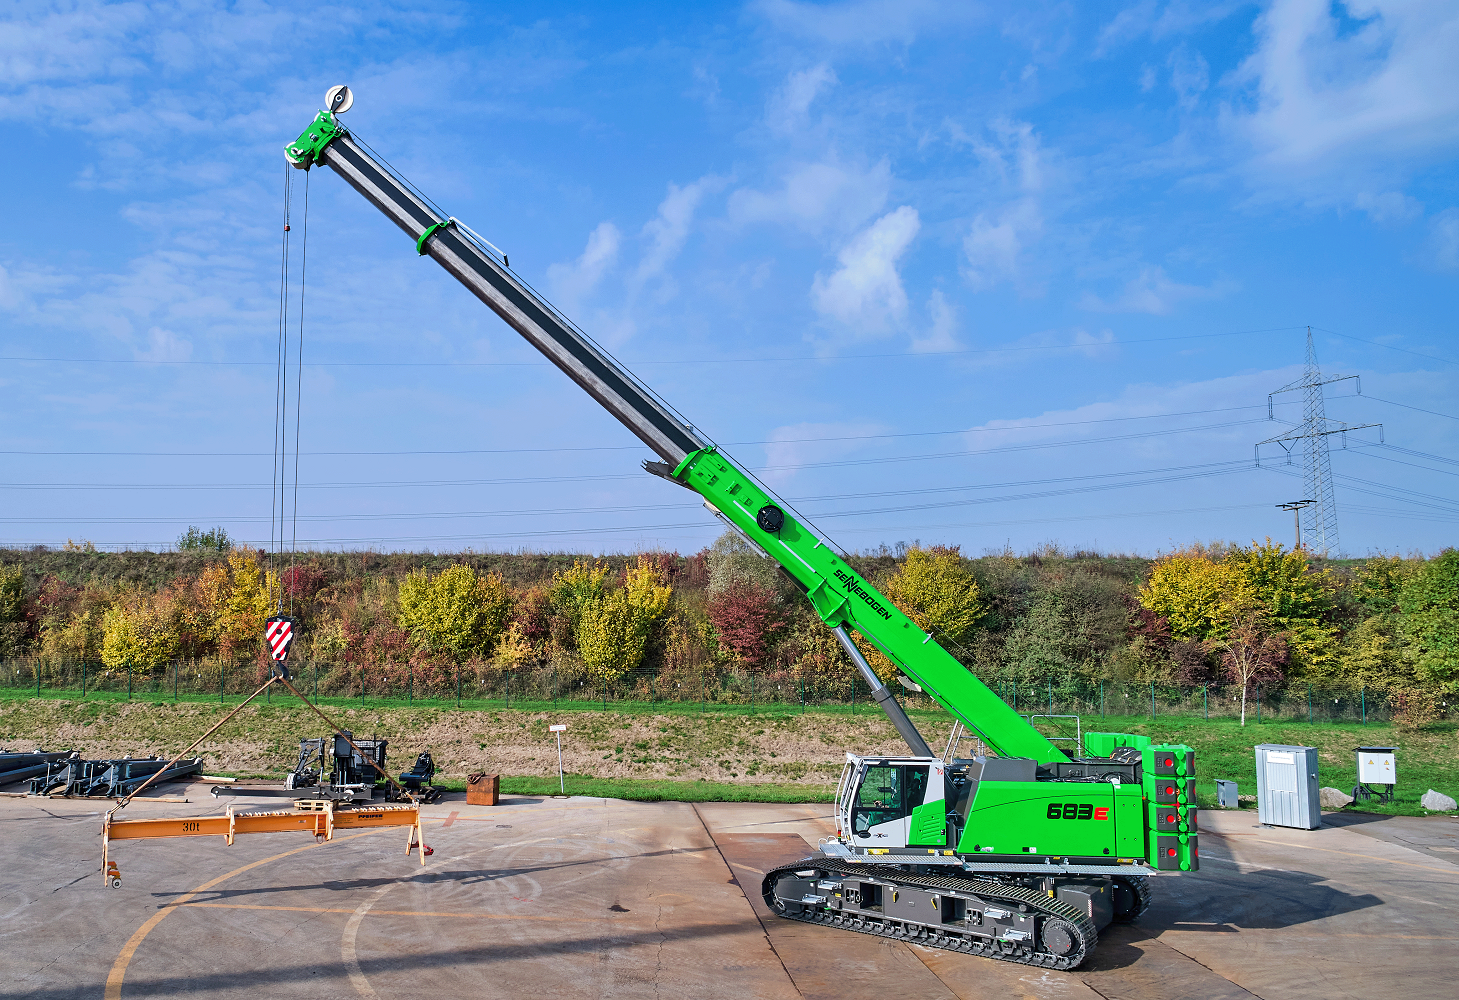 With the market launch of the new 683 E, SENNEBOGEN unveils its new 80-metric-ton crawler telescopic crane. The new machine complements the existing product portfolio perfectly and attracts particular interest due to its boom length of up to 57 m and numerous equipment variants.